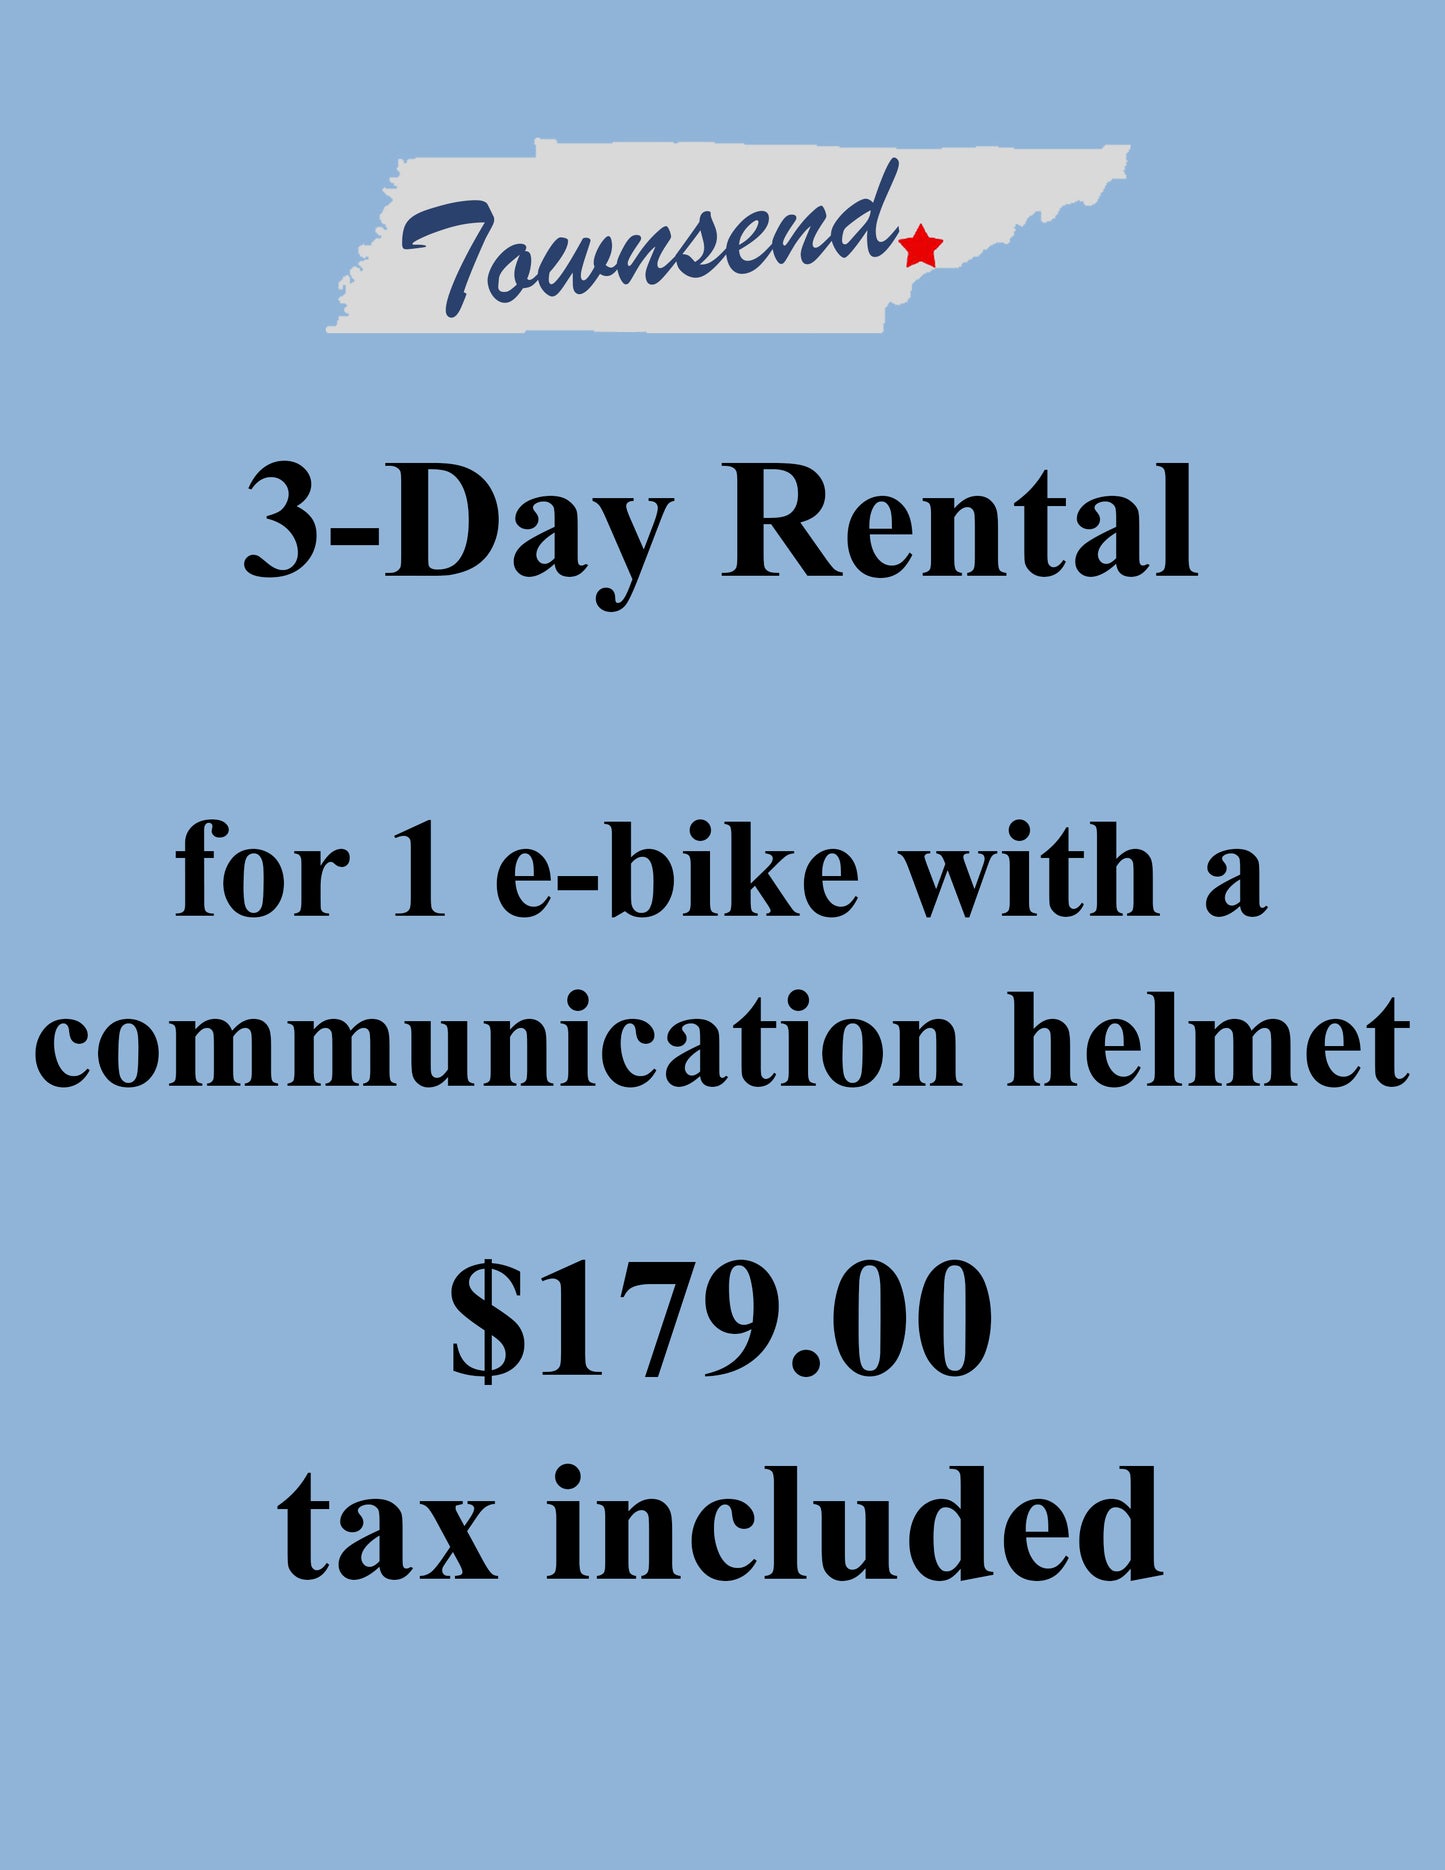 Townsend 3-Day Rental 1 Ebike and Communication Helmet (Tax Included)